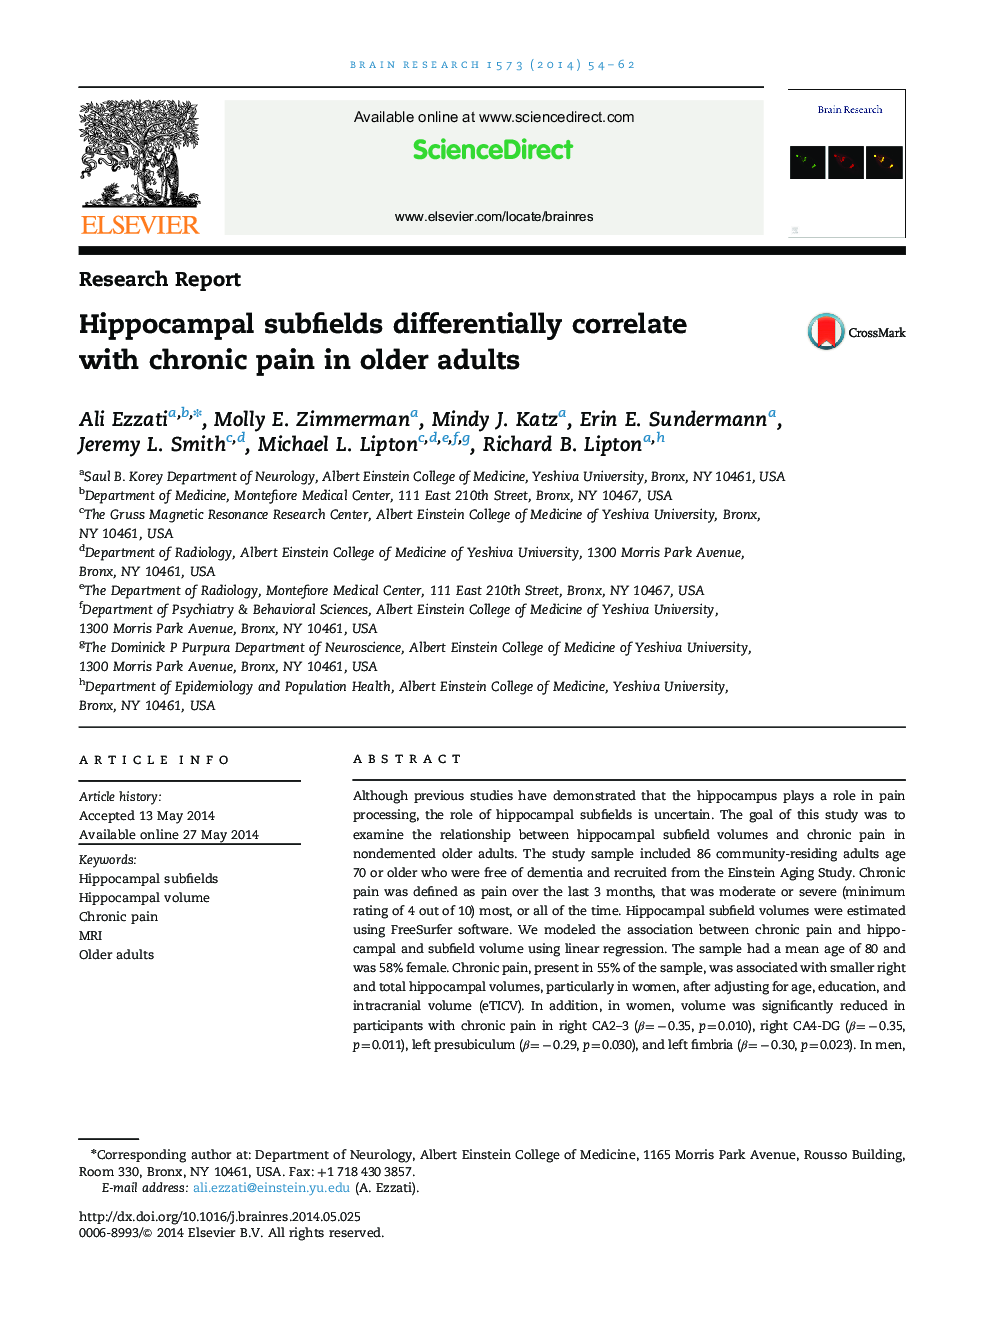 Research ReportHippocampal subfields differentially correlate with chronic pain in older adults